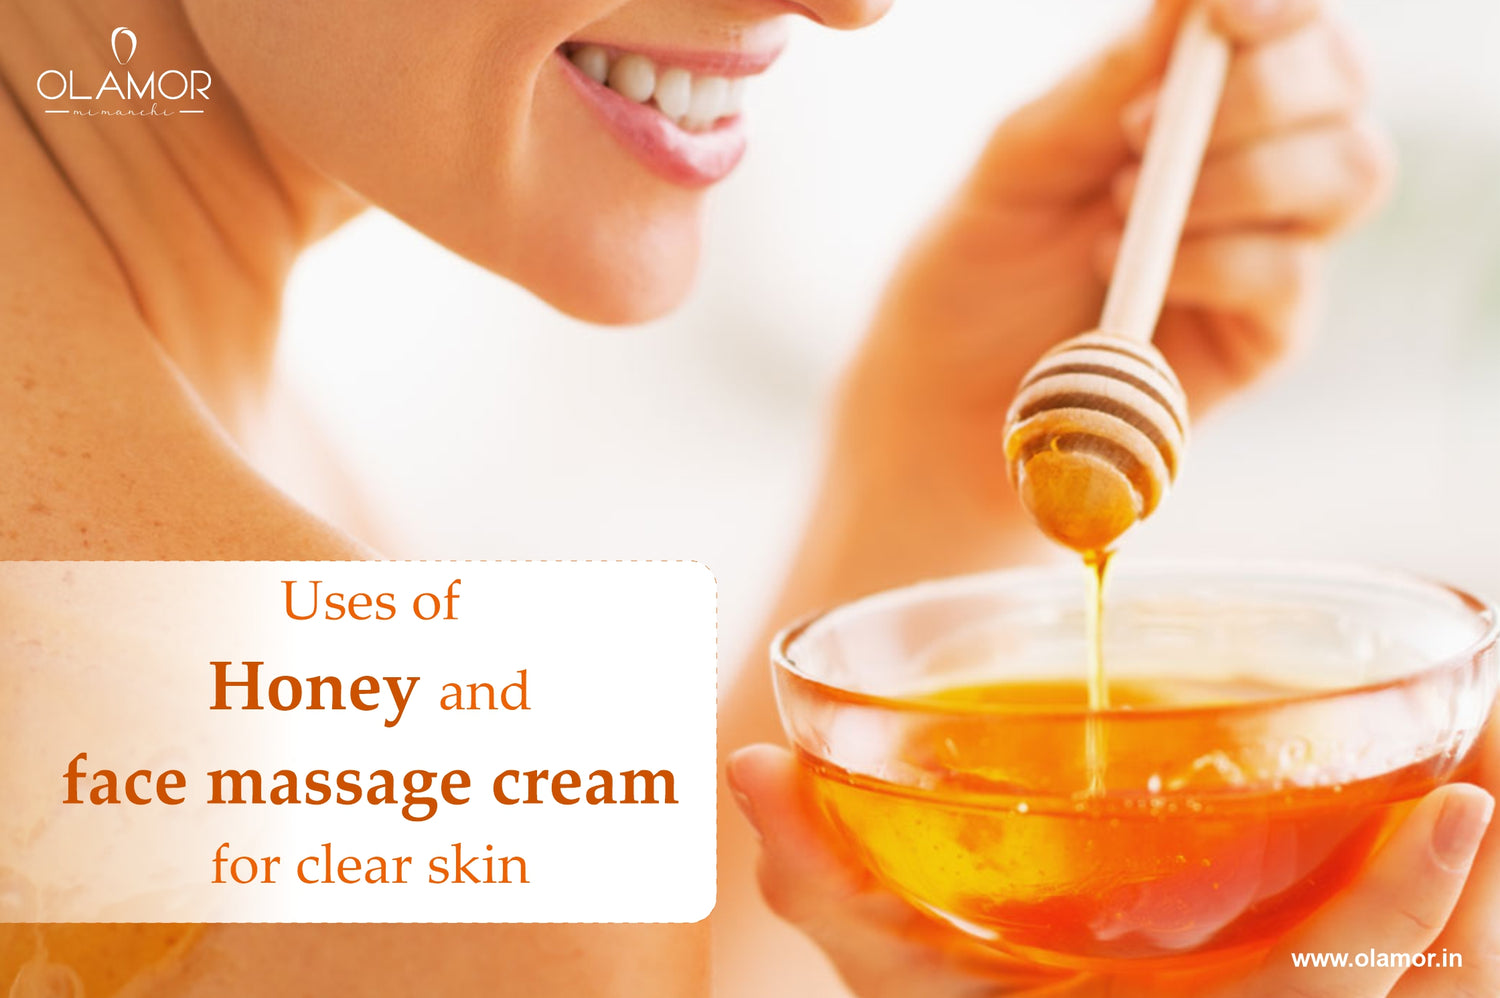 Uses of honey and face massage cream for clear skin